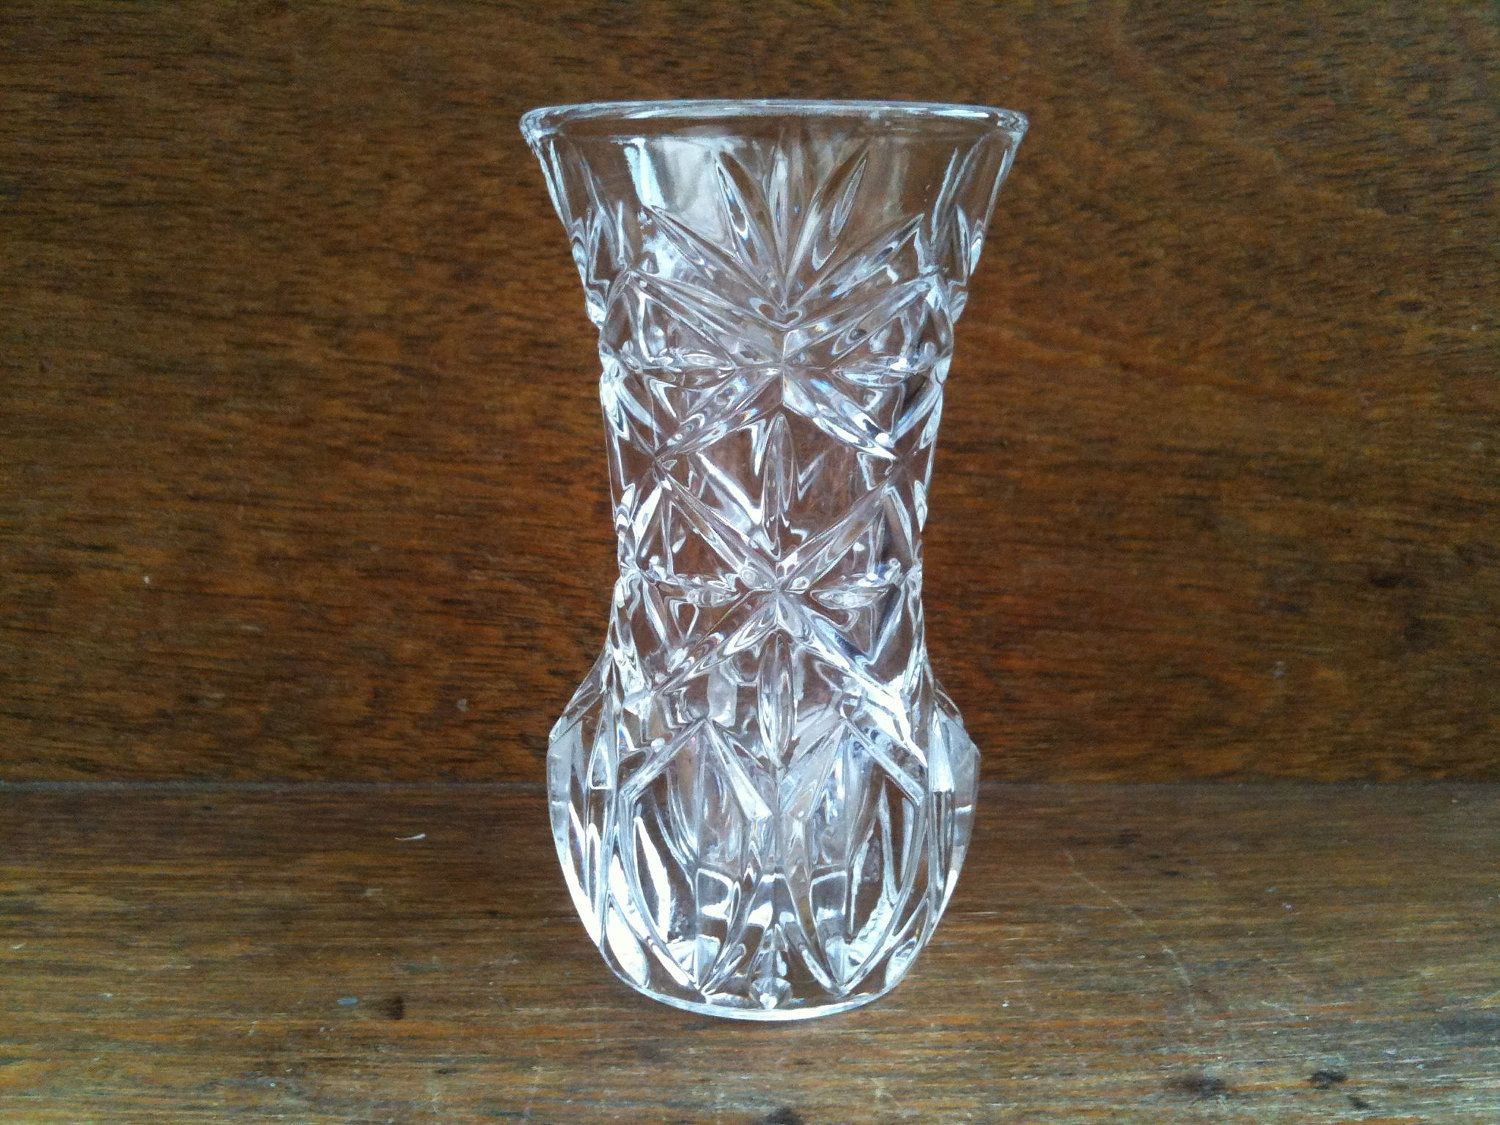 21 Awesome Vintage Glass Vases for Sale 2024 free download vintage glass vases for sale of vintage english small bud lead crystal glass vase circa 1950s within vintage english small bud lead crystal glass vase circa 1950s purchase in store here http